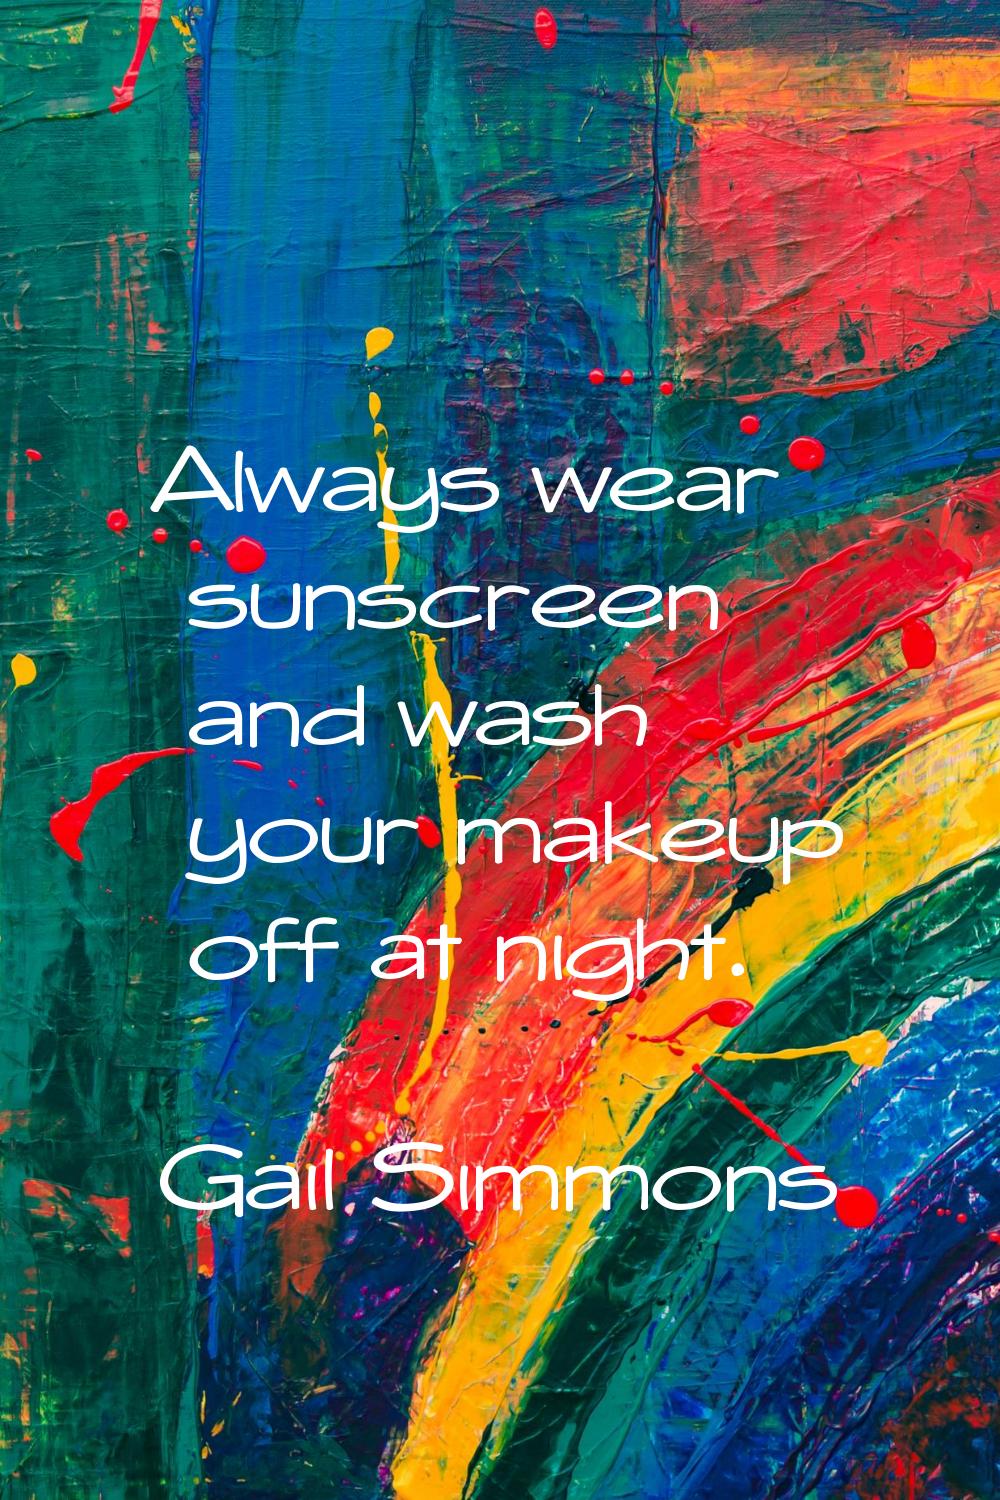 Always wear sunscreen and wash your makeup off at night.